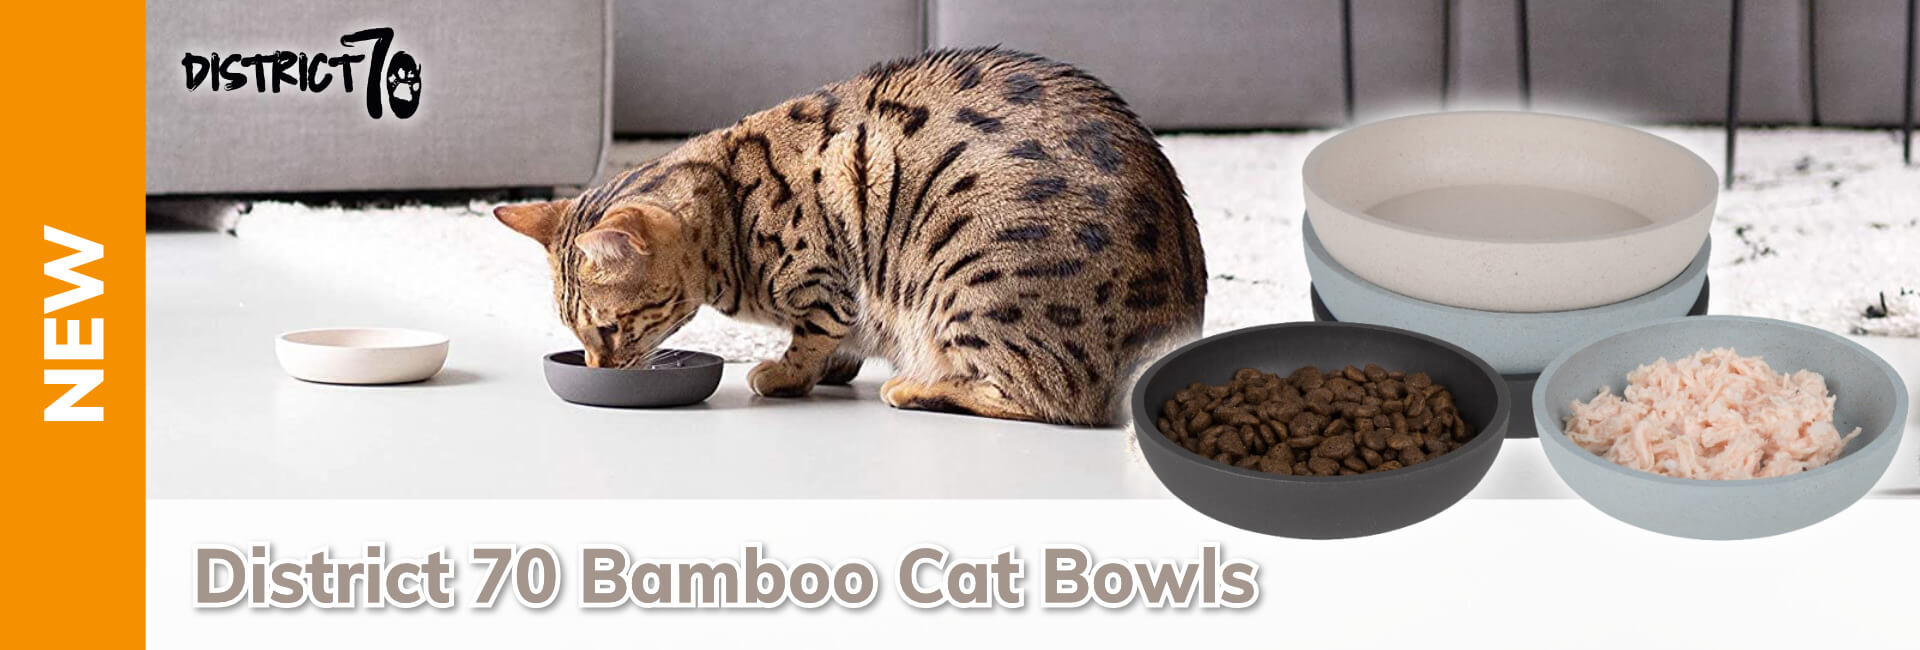 District 70 Bamboo Cat Bowls